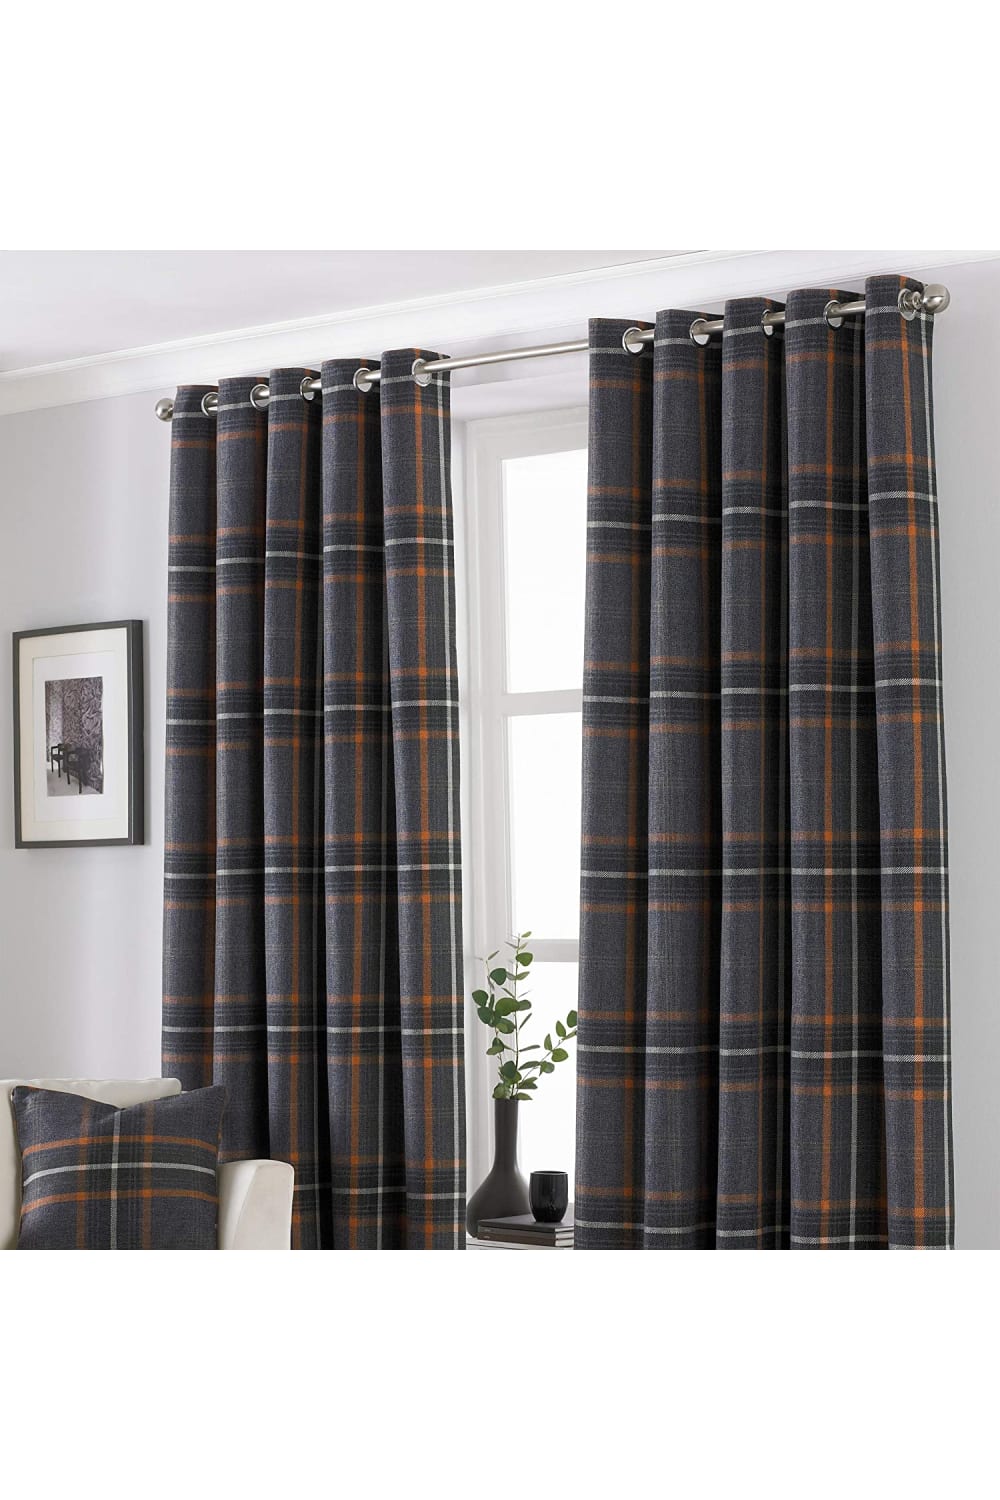 Riva Home Aviemore Checked Pattern Ringtop Curtains/Drapes (Rust) (90 x 90in (229 x 229cm))